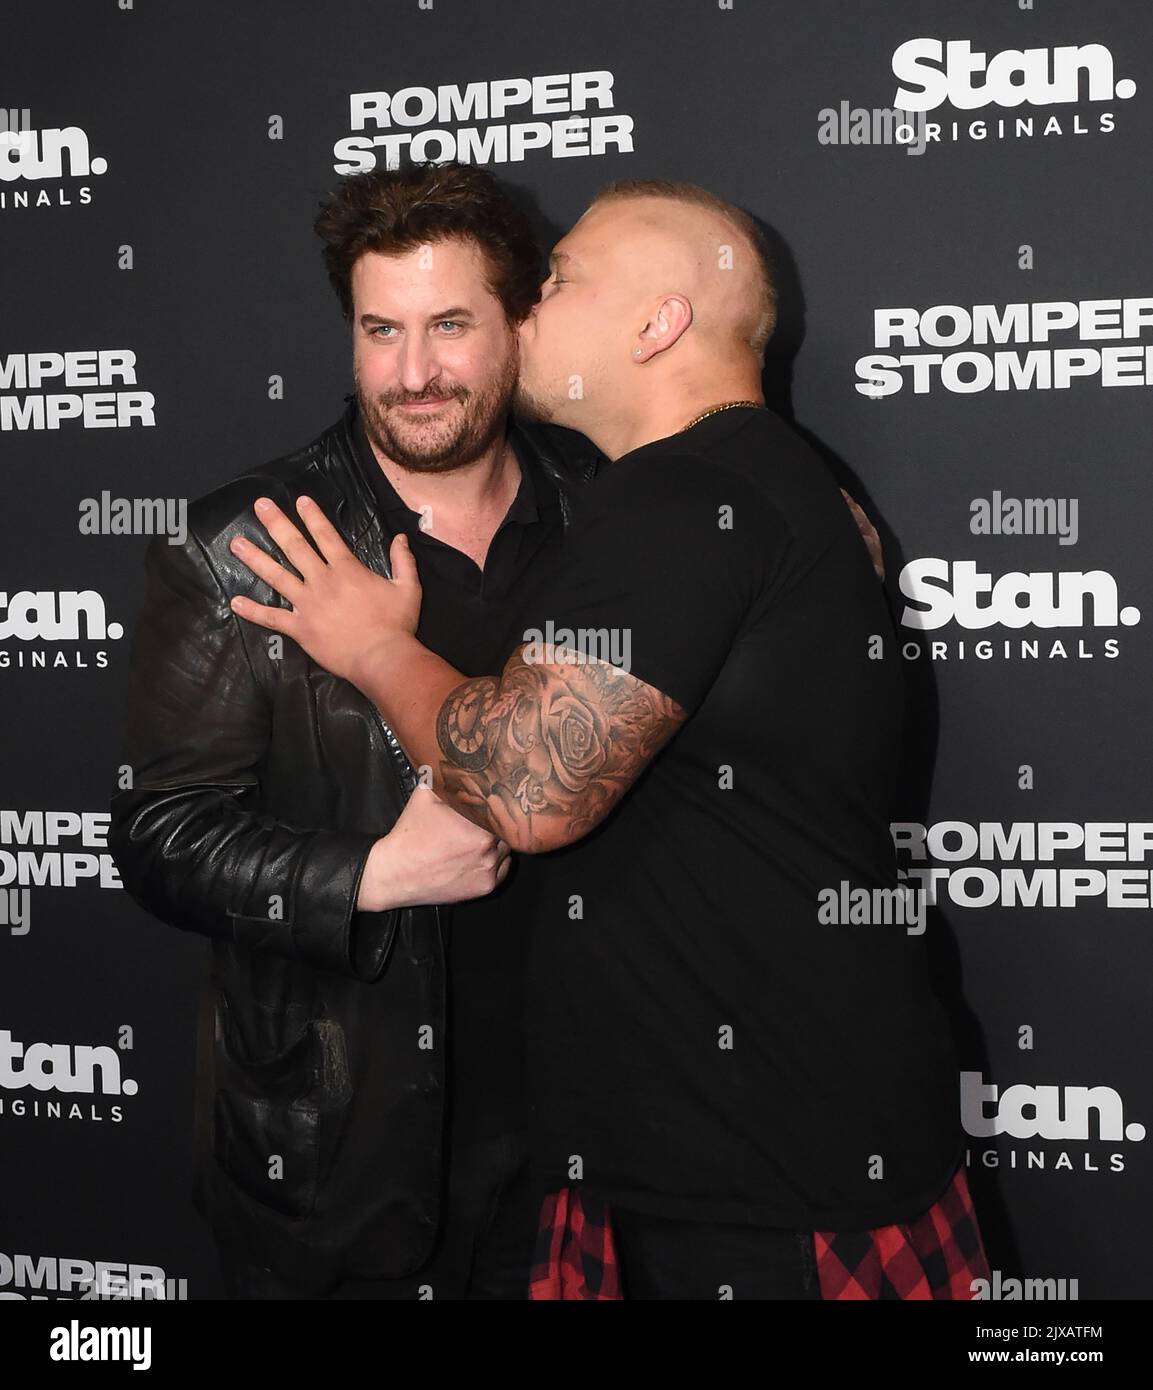 Lachy Hulme and Kaden Hartcher arrive at the Romper Stomper TV series premiere in Melbourne, Tuesday, December 5, 2017. (AAP Image/Mal Fairclough) Stock Photo